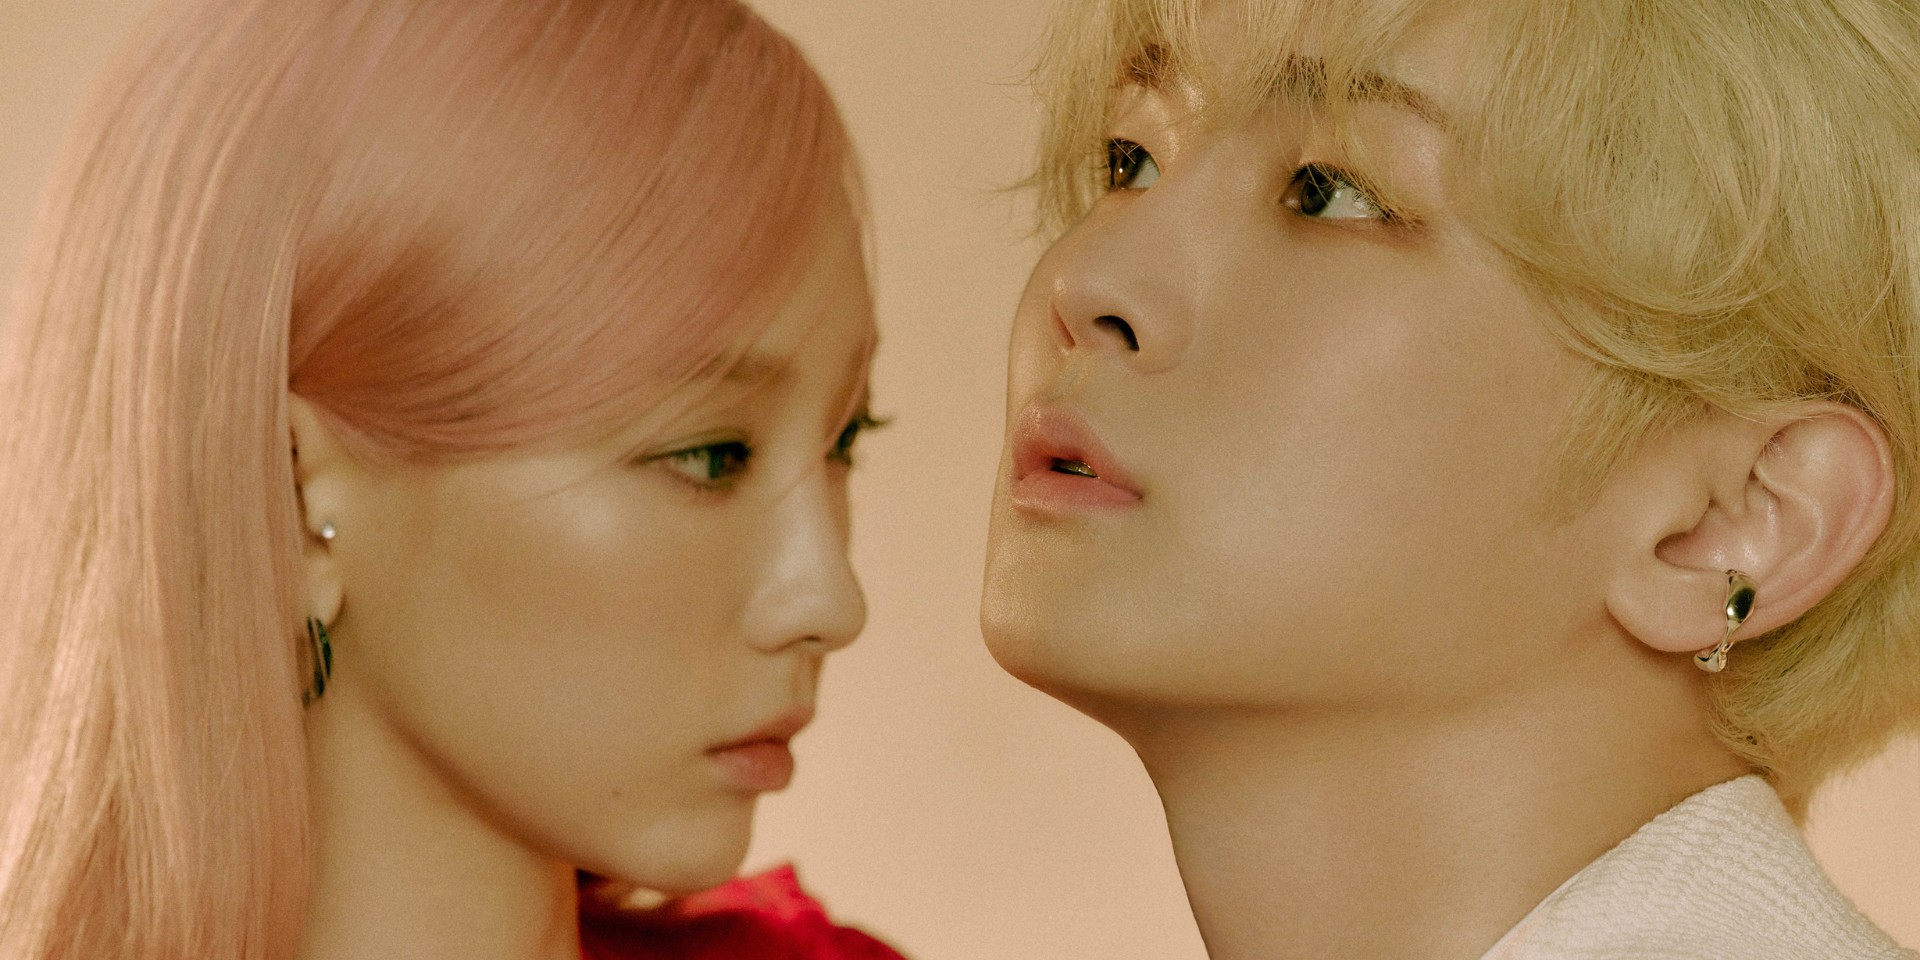 SHINee's Key and Taeyeon unveil collaborative track 'Hate that...' with music video - watch